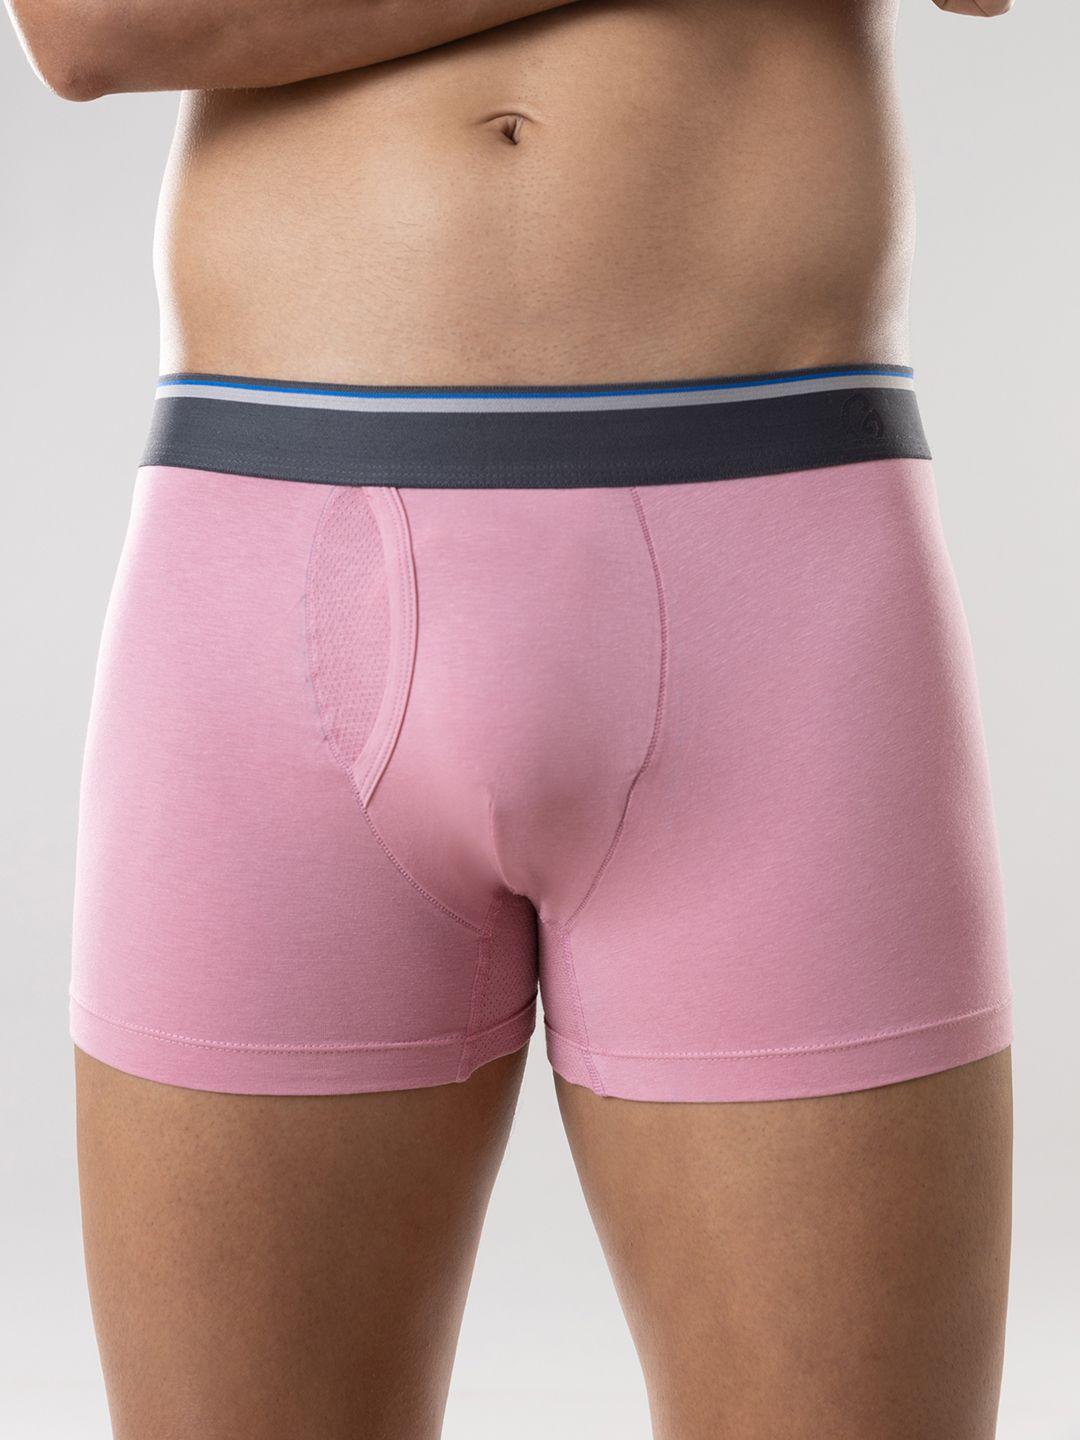 gloot pink cotton tencel anti-odor & cool mesh zone trunks gluctoetr01